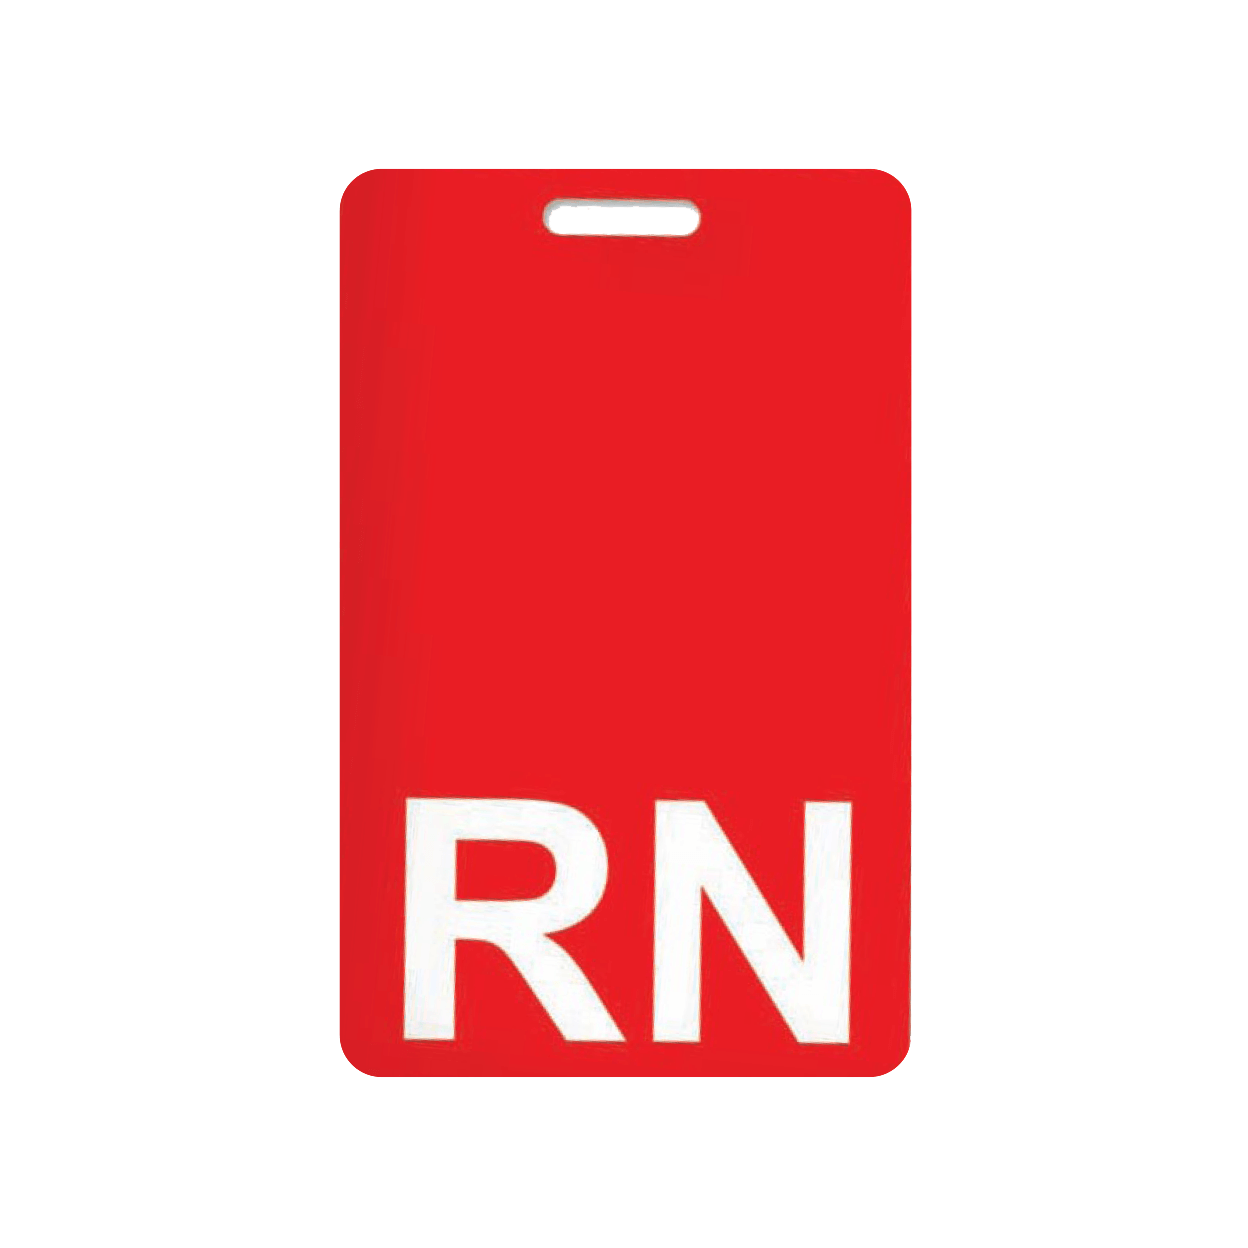 RN Badge Security and Access